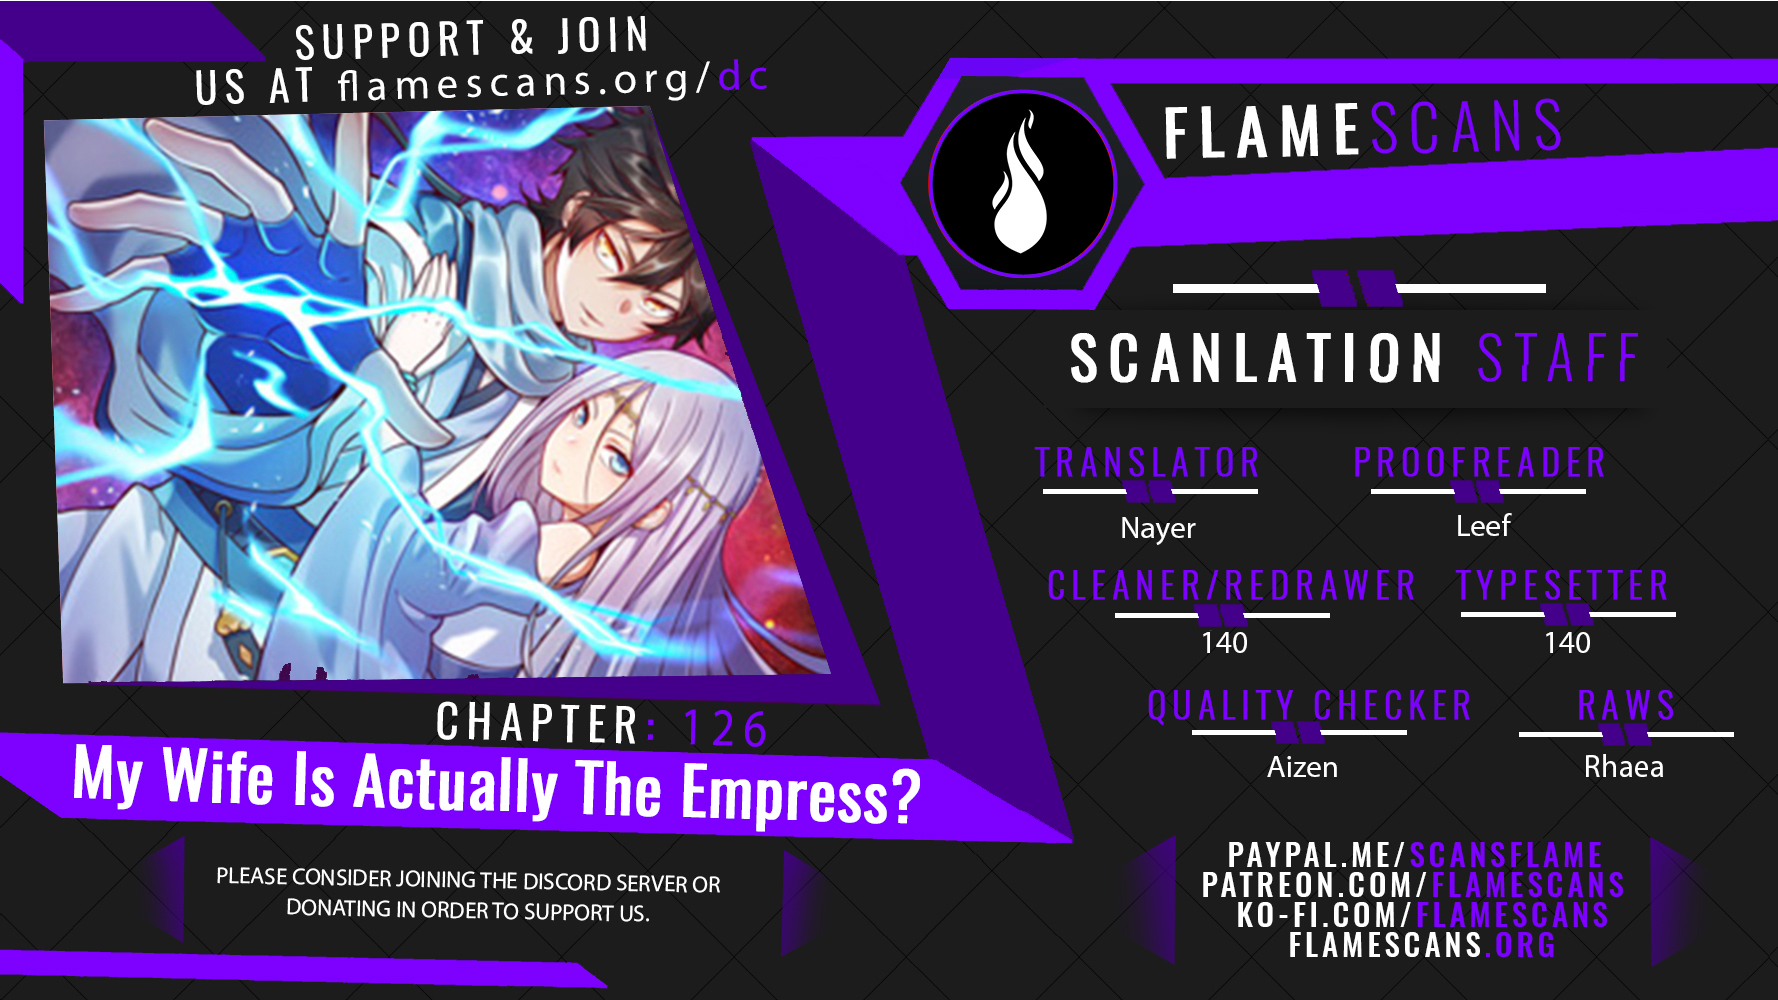 My Wife Is Actually The Empress? - Chapter 28171 - Image 1